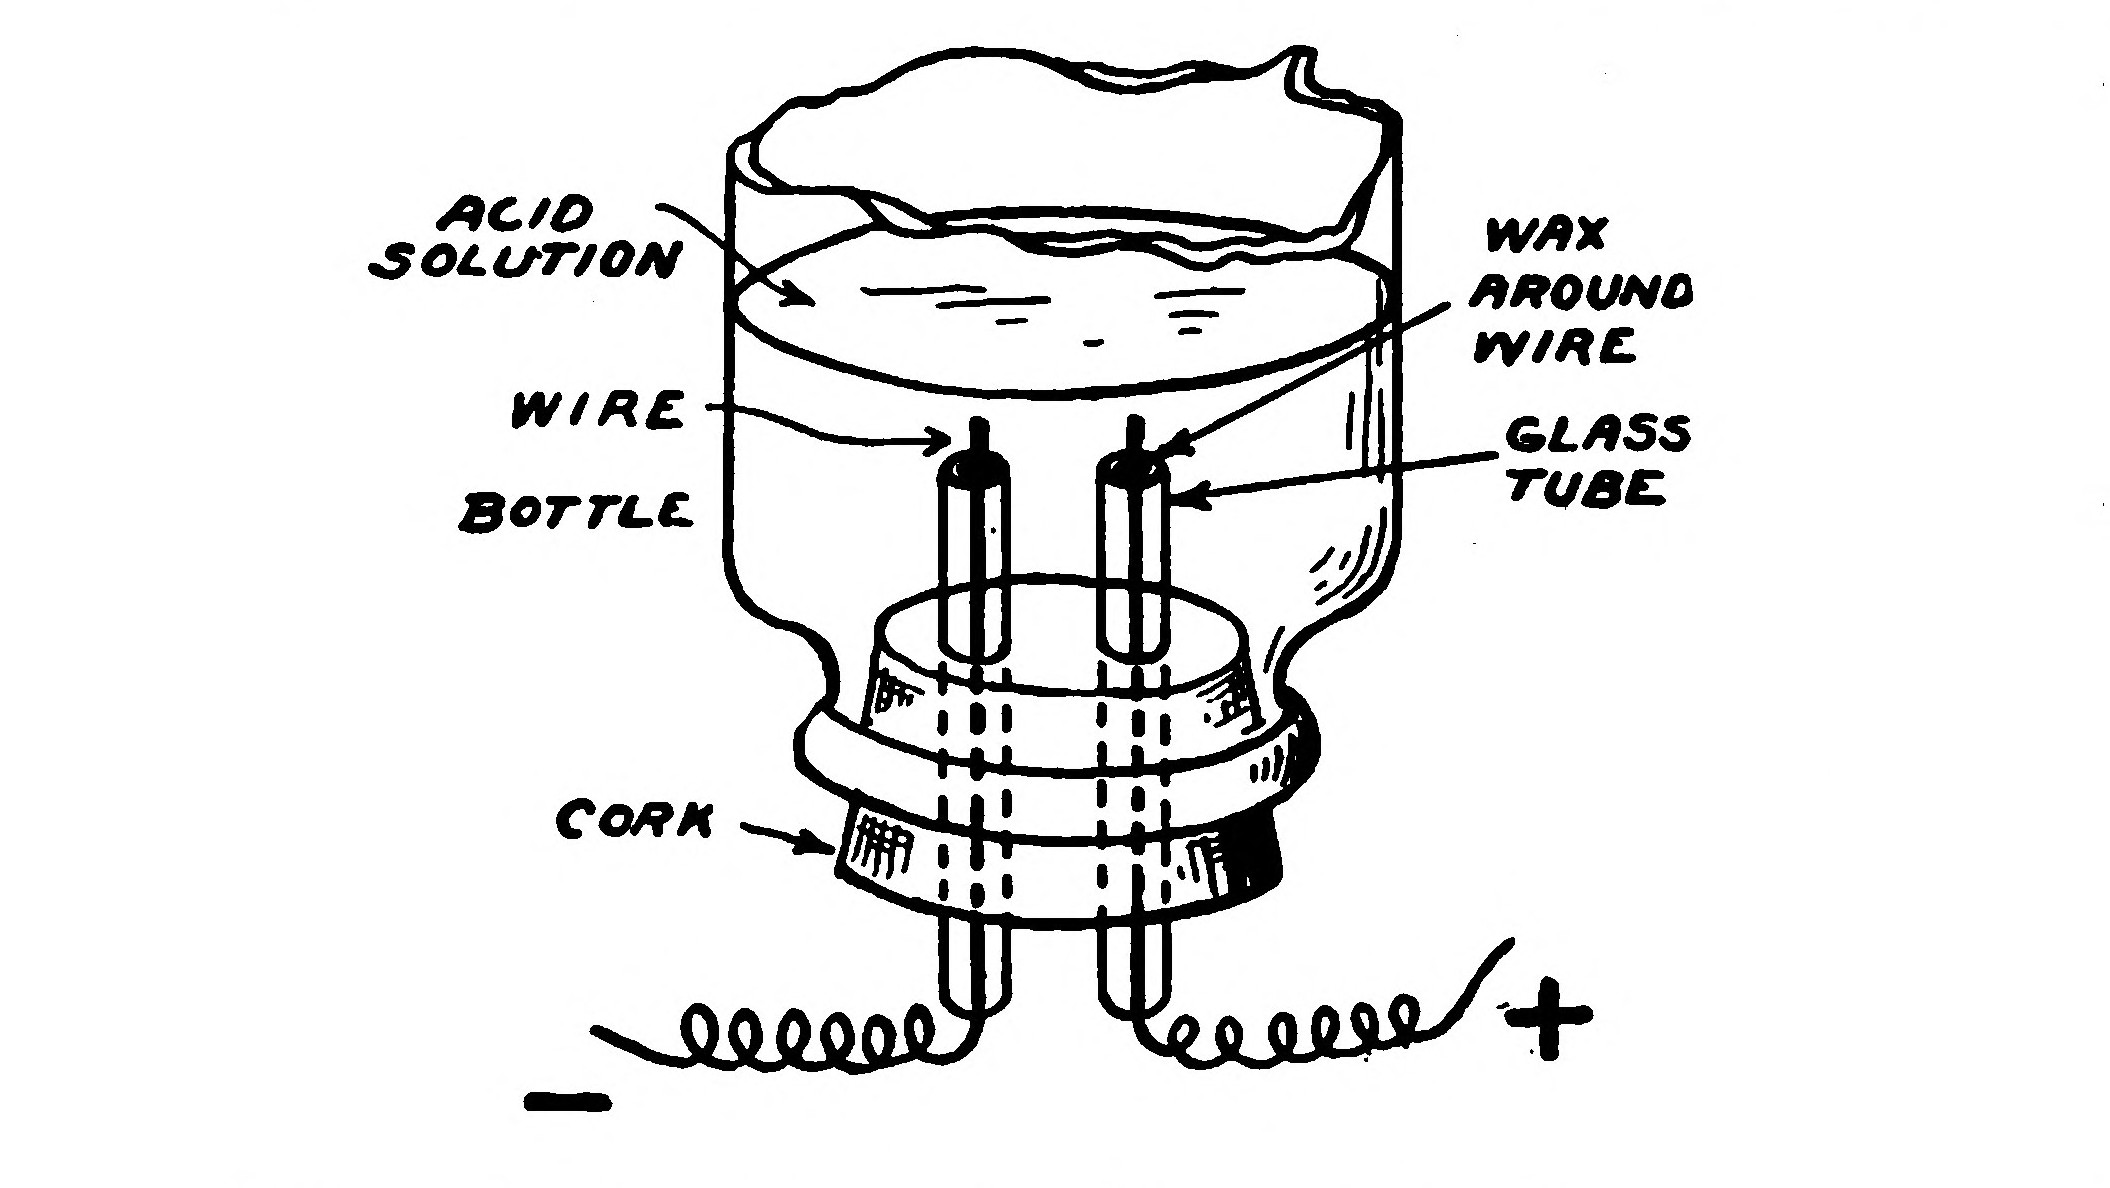 FIG. 185.—Apparatus for Electrolysis Experiment.